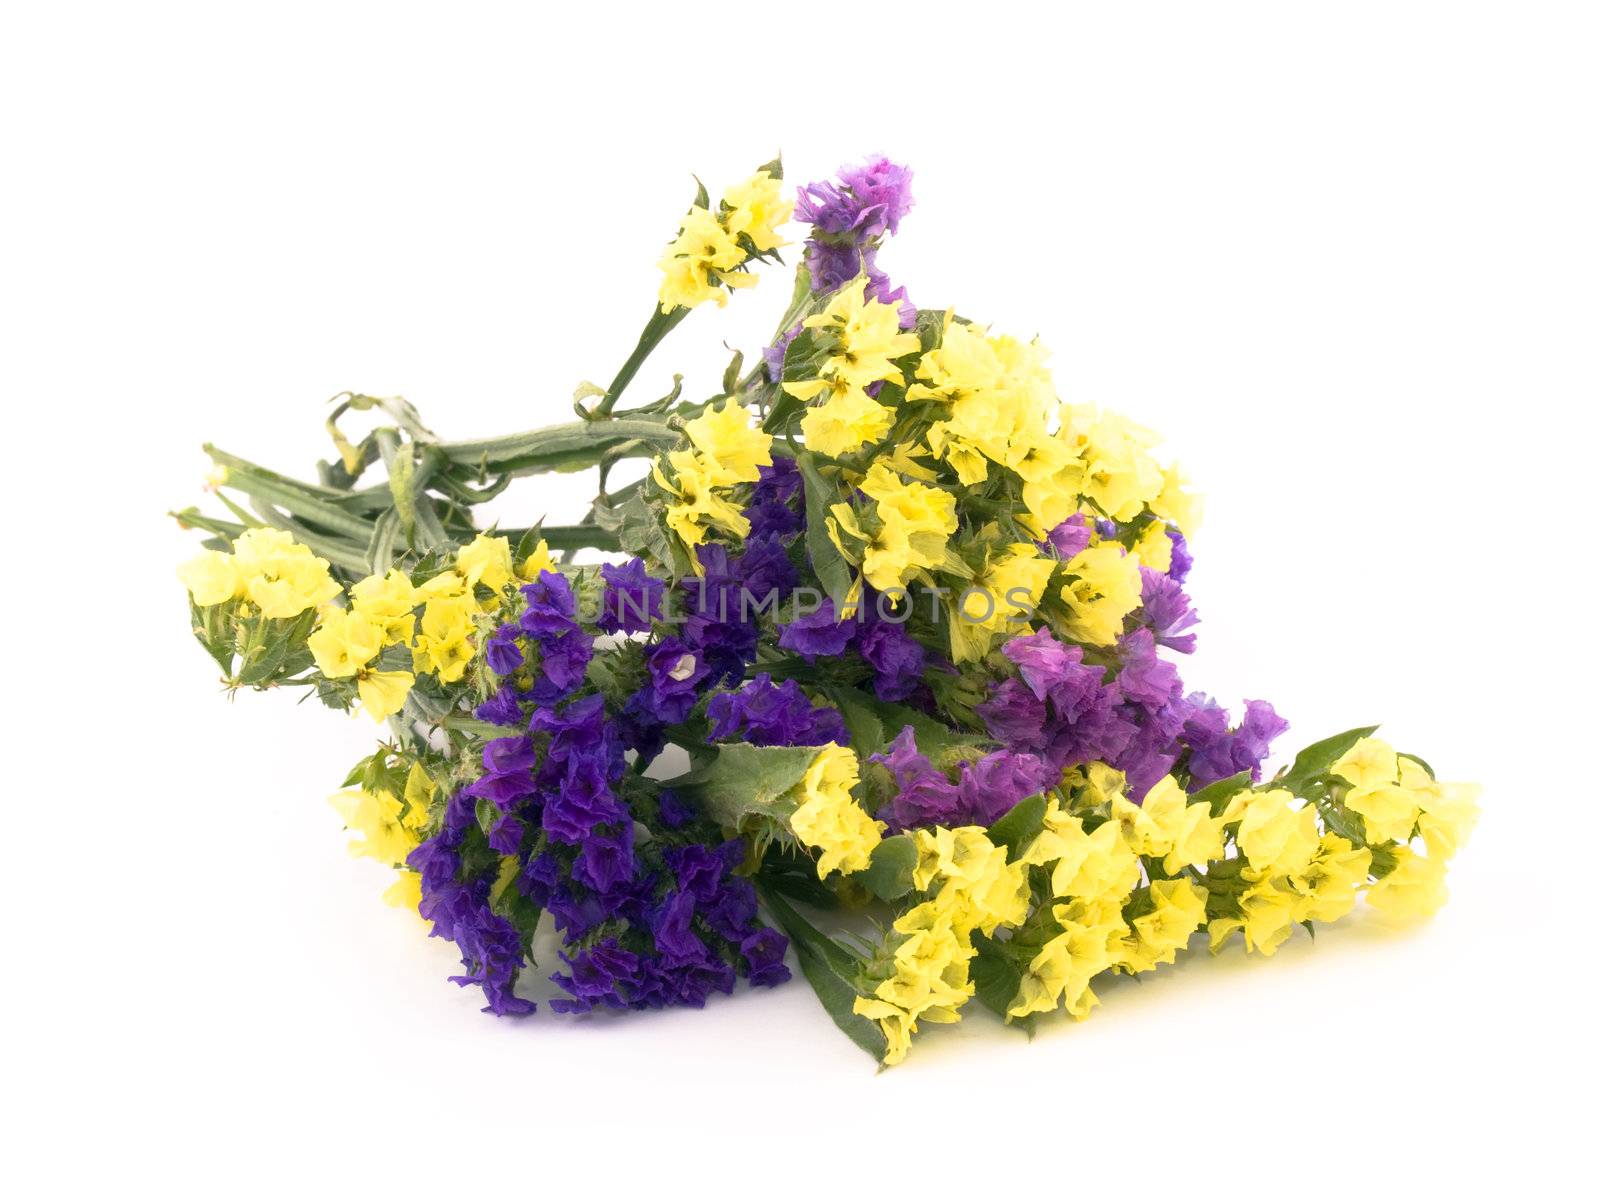 Bouquet of beautiful statice flowers on white background.